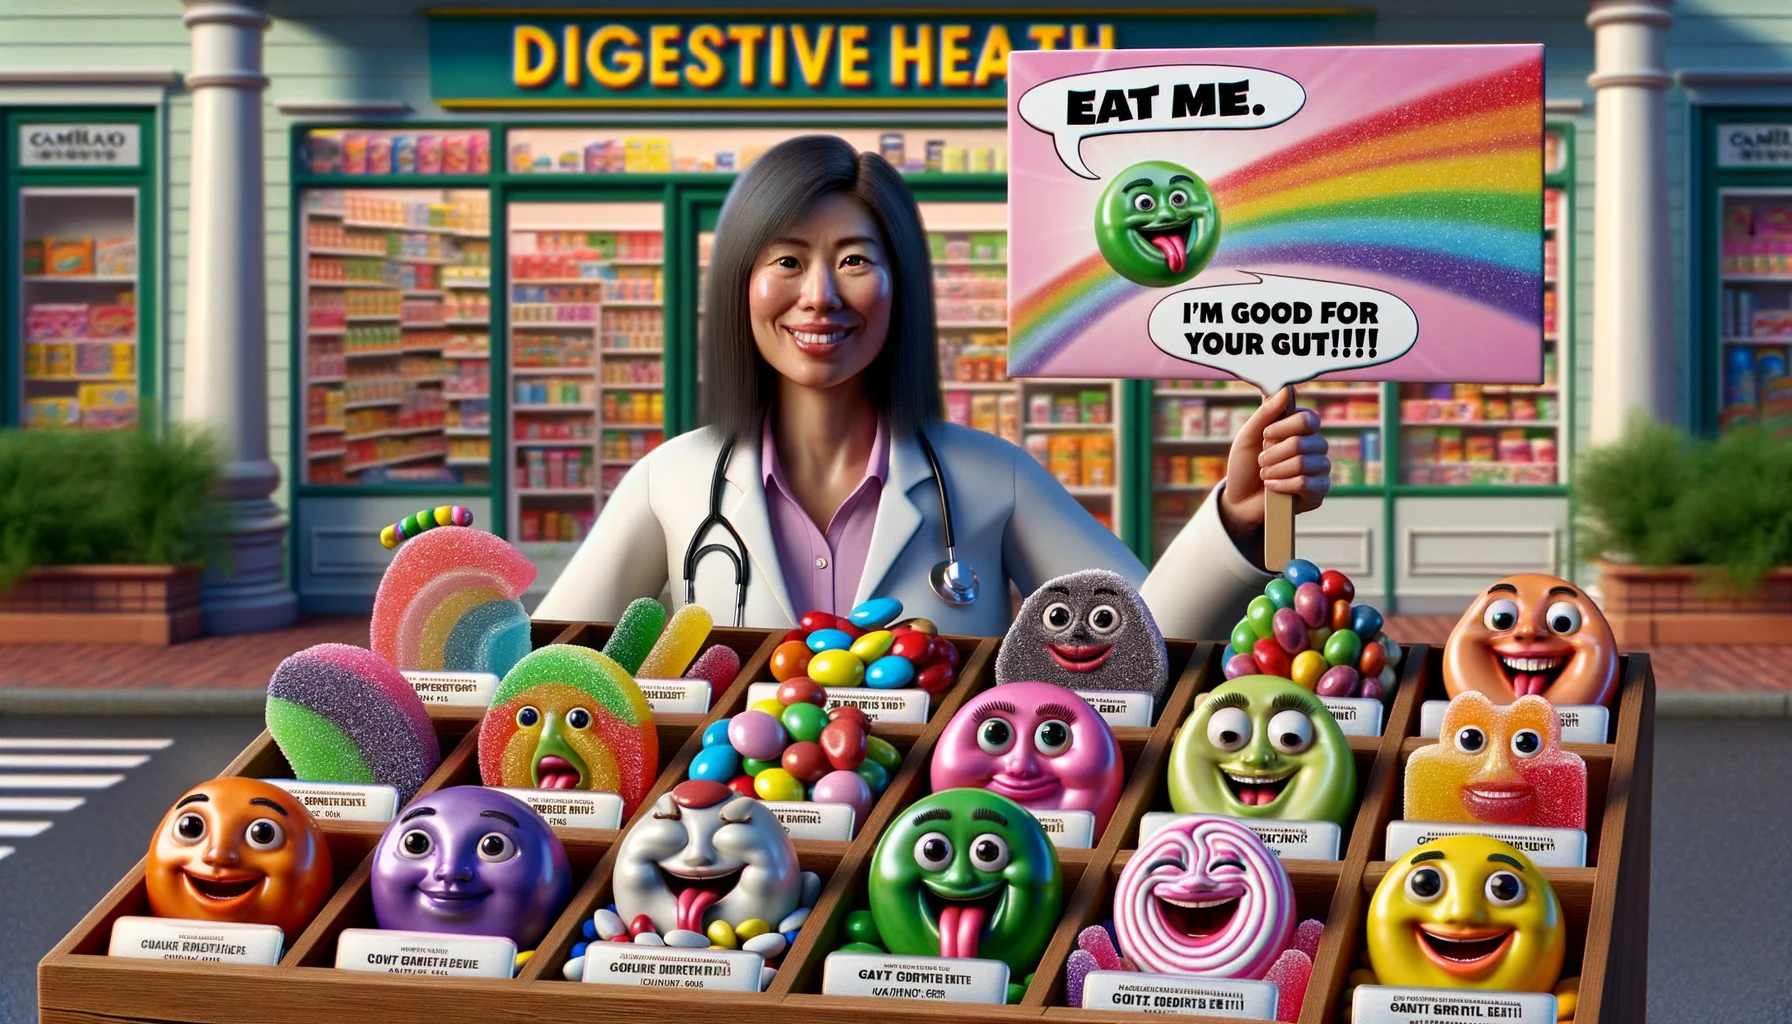 Imagine an amusing, ultra-realistic scene capturing the perfect selection of digestive health-friendly candies. There's a variety of candies, vividly colored and shaped differently, all claiming their benefits. Each candy has a cheerful facial expression with a little speech bubble, each one proclaiming, 'Eat me, I'm good for your gut!' On the side, a friendly pharmacist is proudly presenting the selection, an Asian woman with a warm smile. A rainbow bursts from behind the candy display, symbolizing a promise of good health. It's a perfect blend of humor, health, and sweetness.